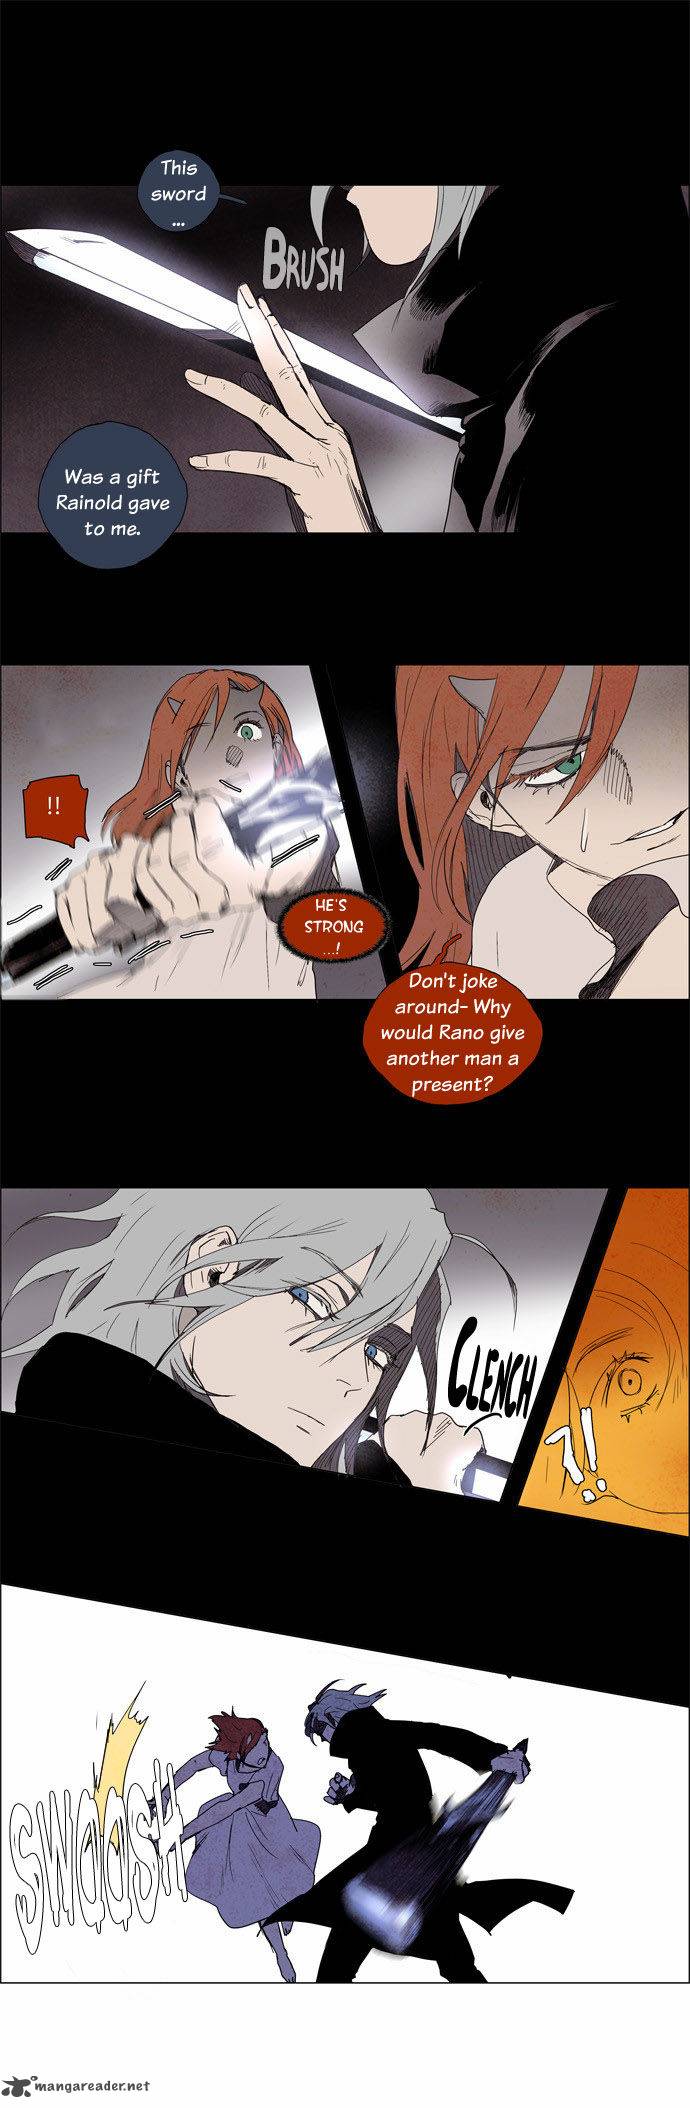 Lessa The Crimson Knight Chapter 6 Page 11